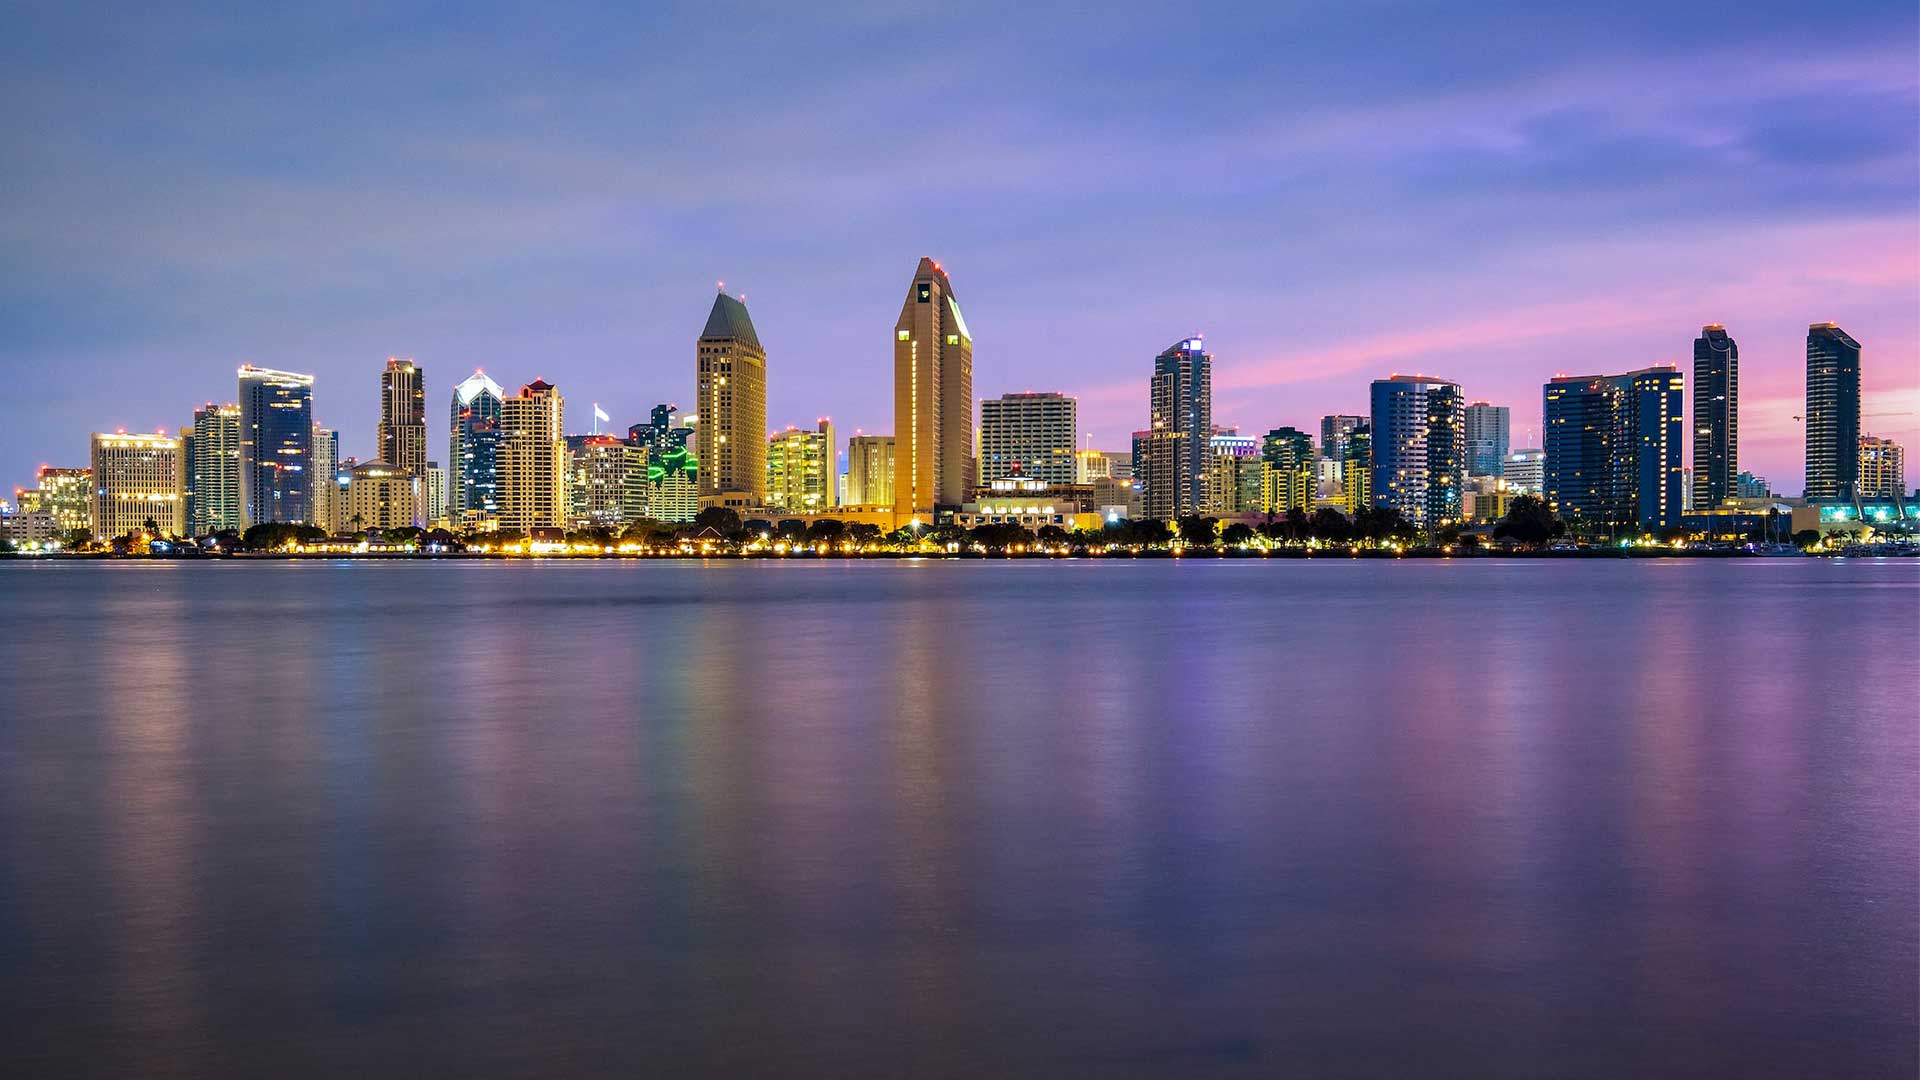 San Diego Skyline in the Morning